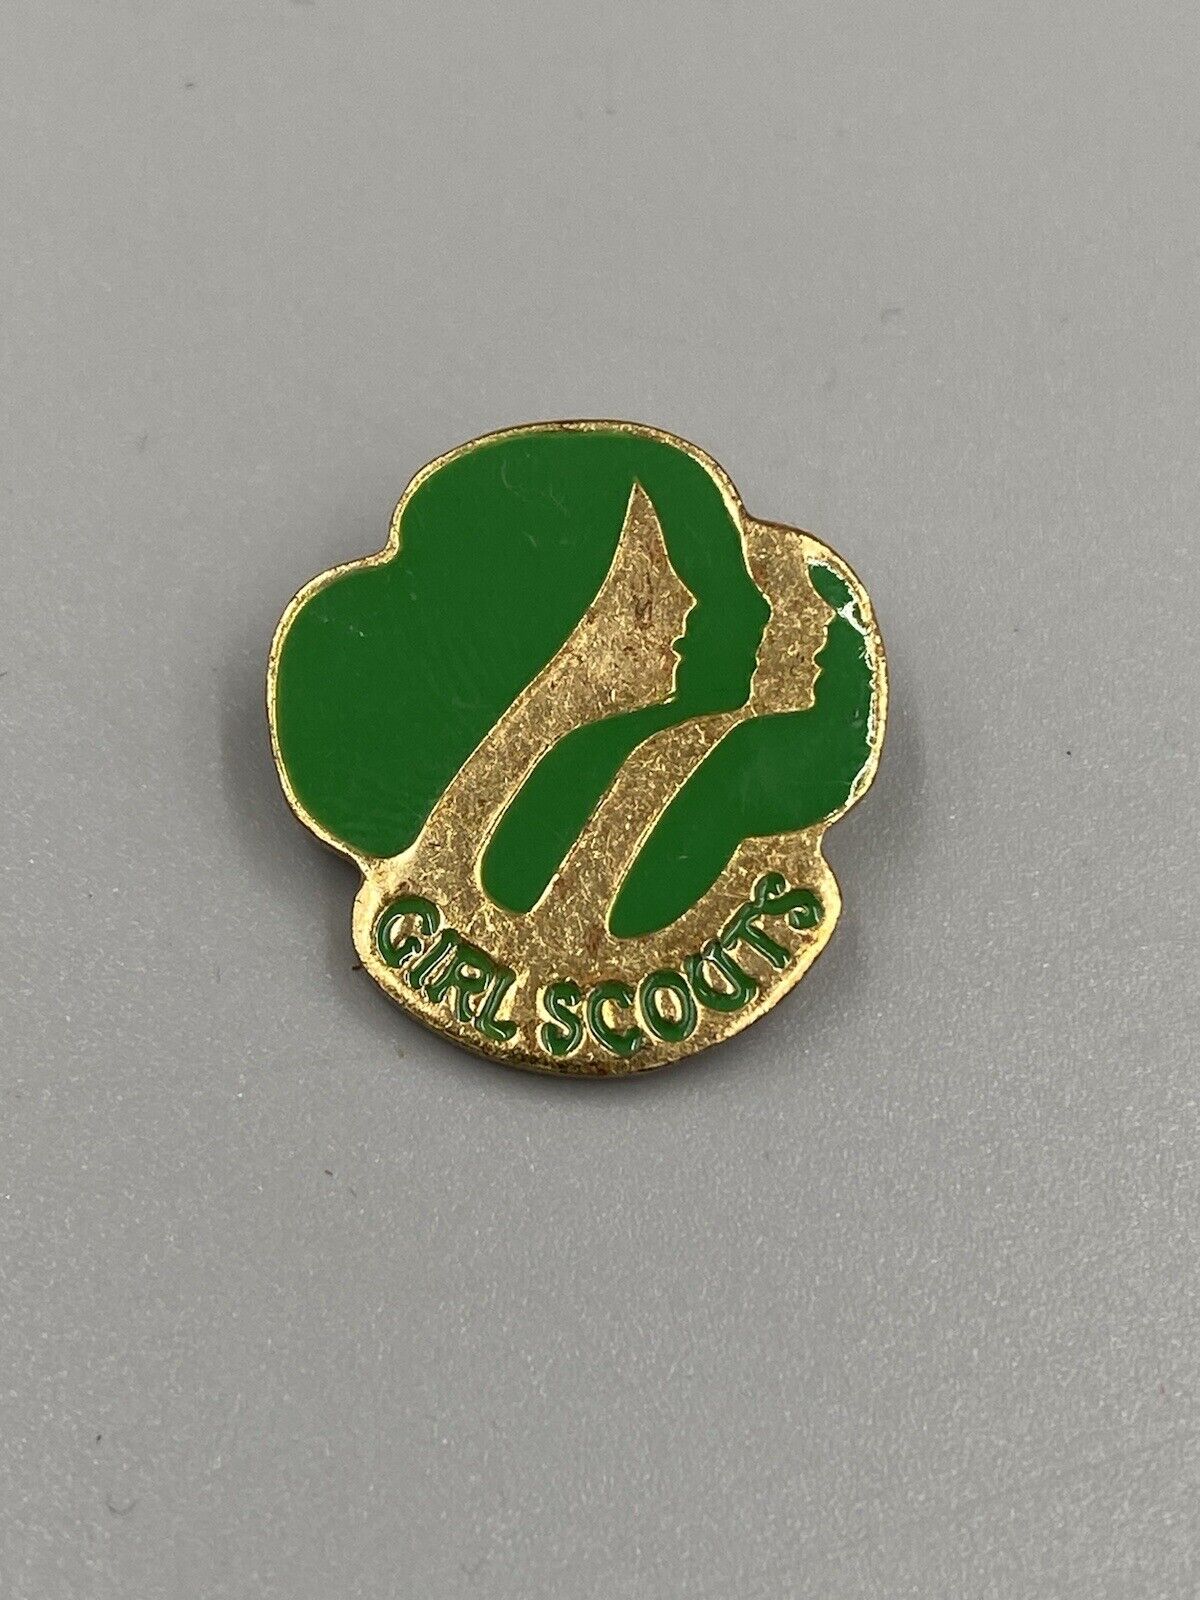 Vintage 1980 Girl Scouts GSUSA Lapel Pin Brooch